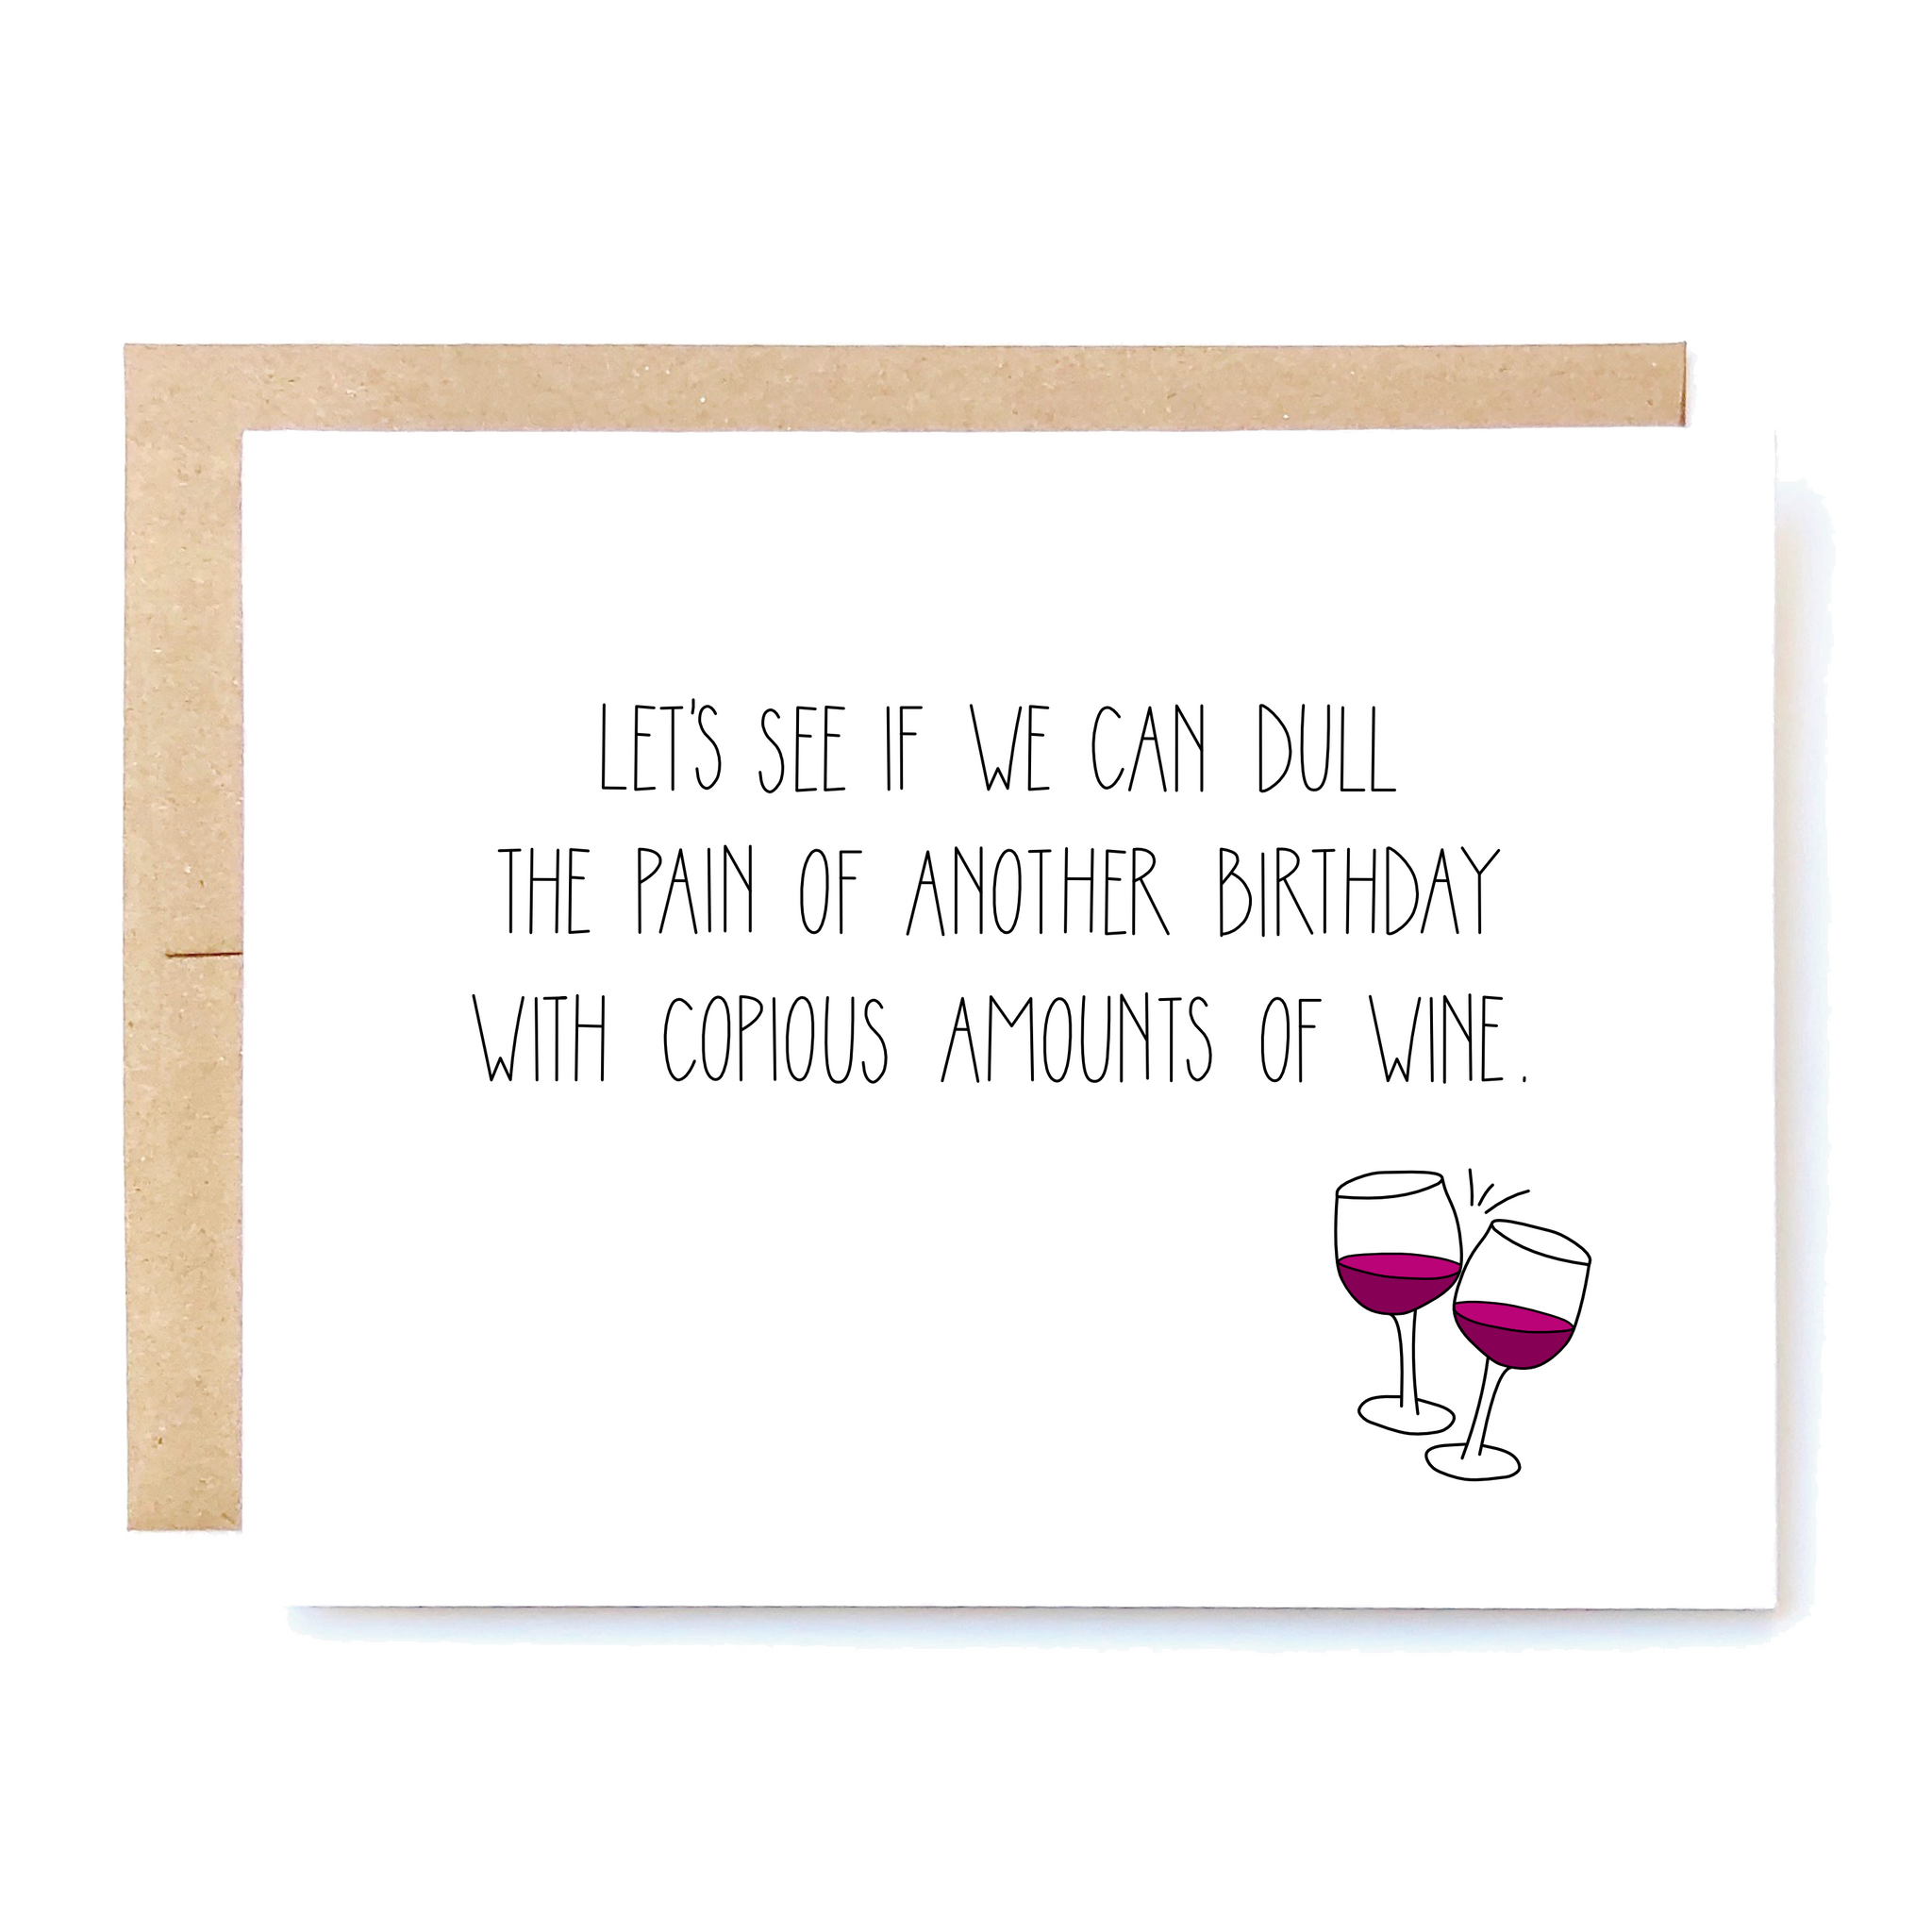 Card Front: Let's see if we can dull the pain of another birthday with copious amounts of wine.